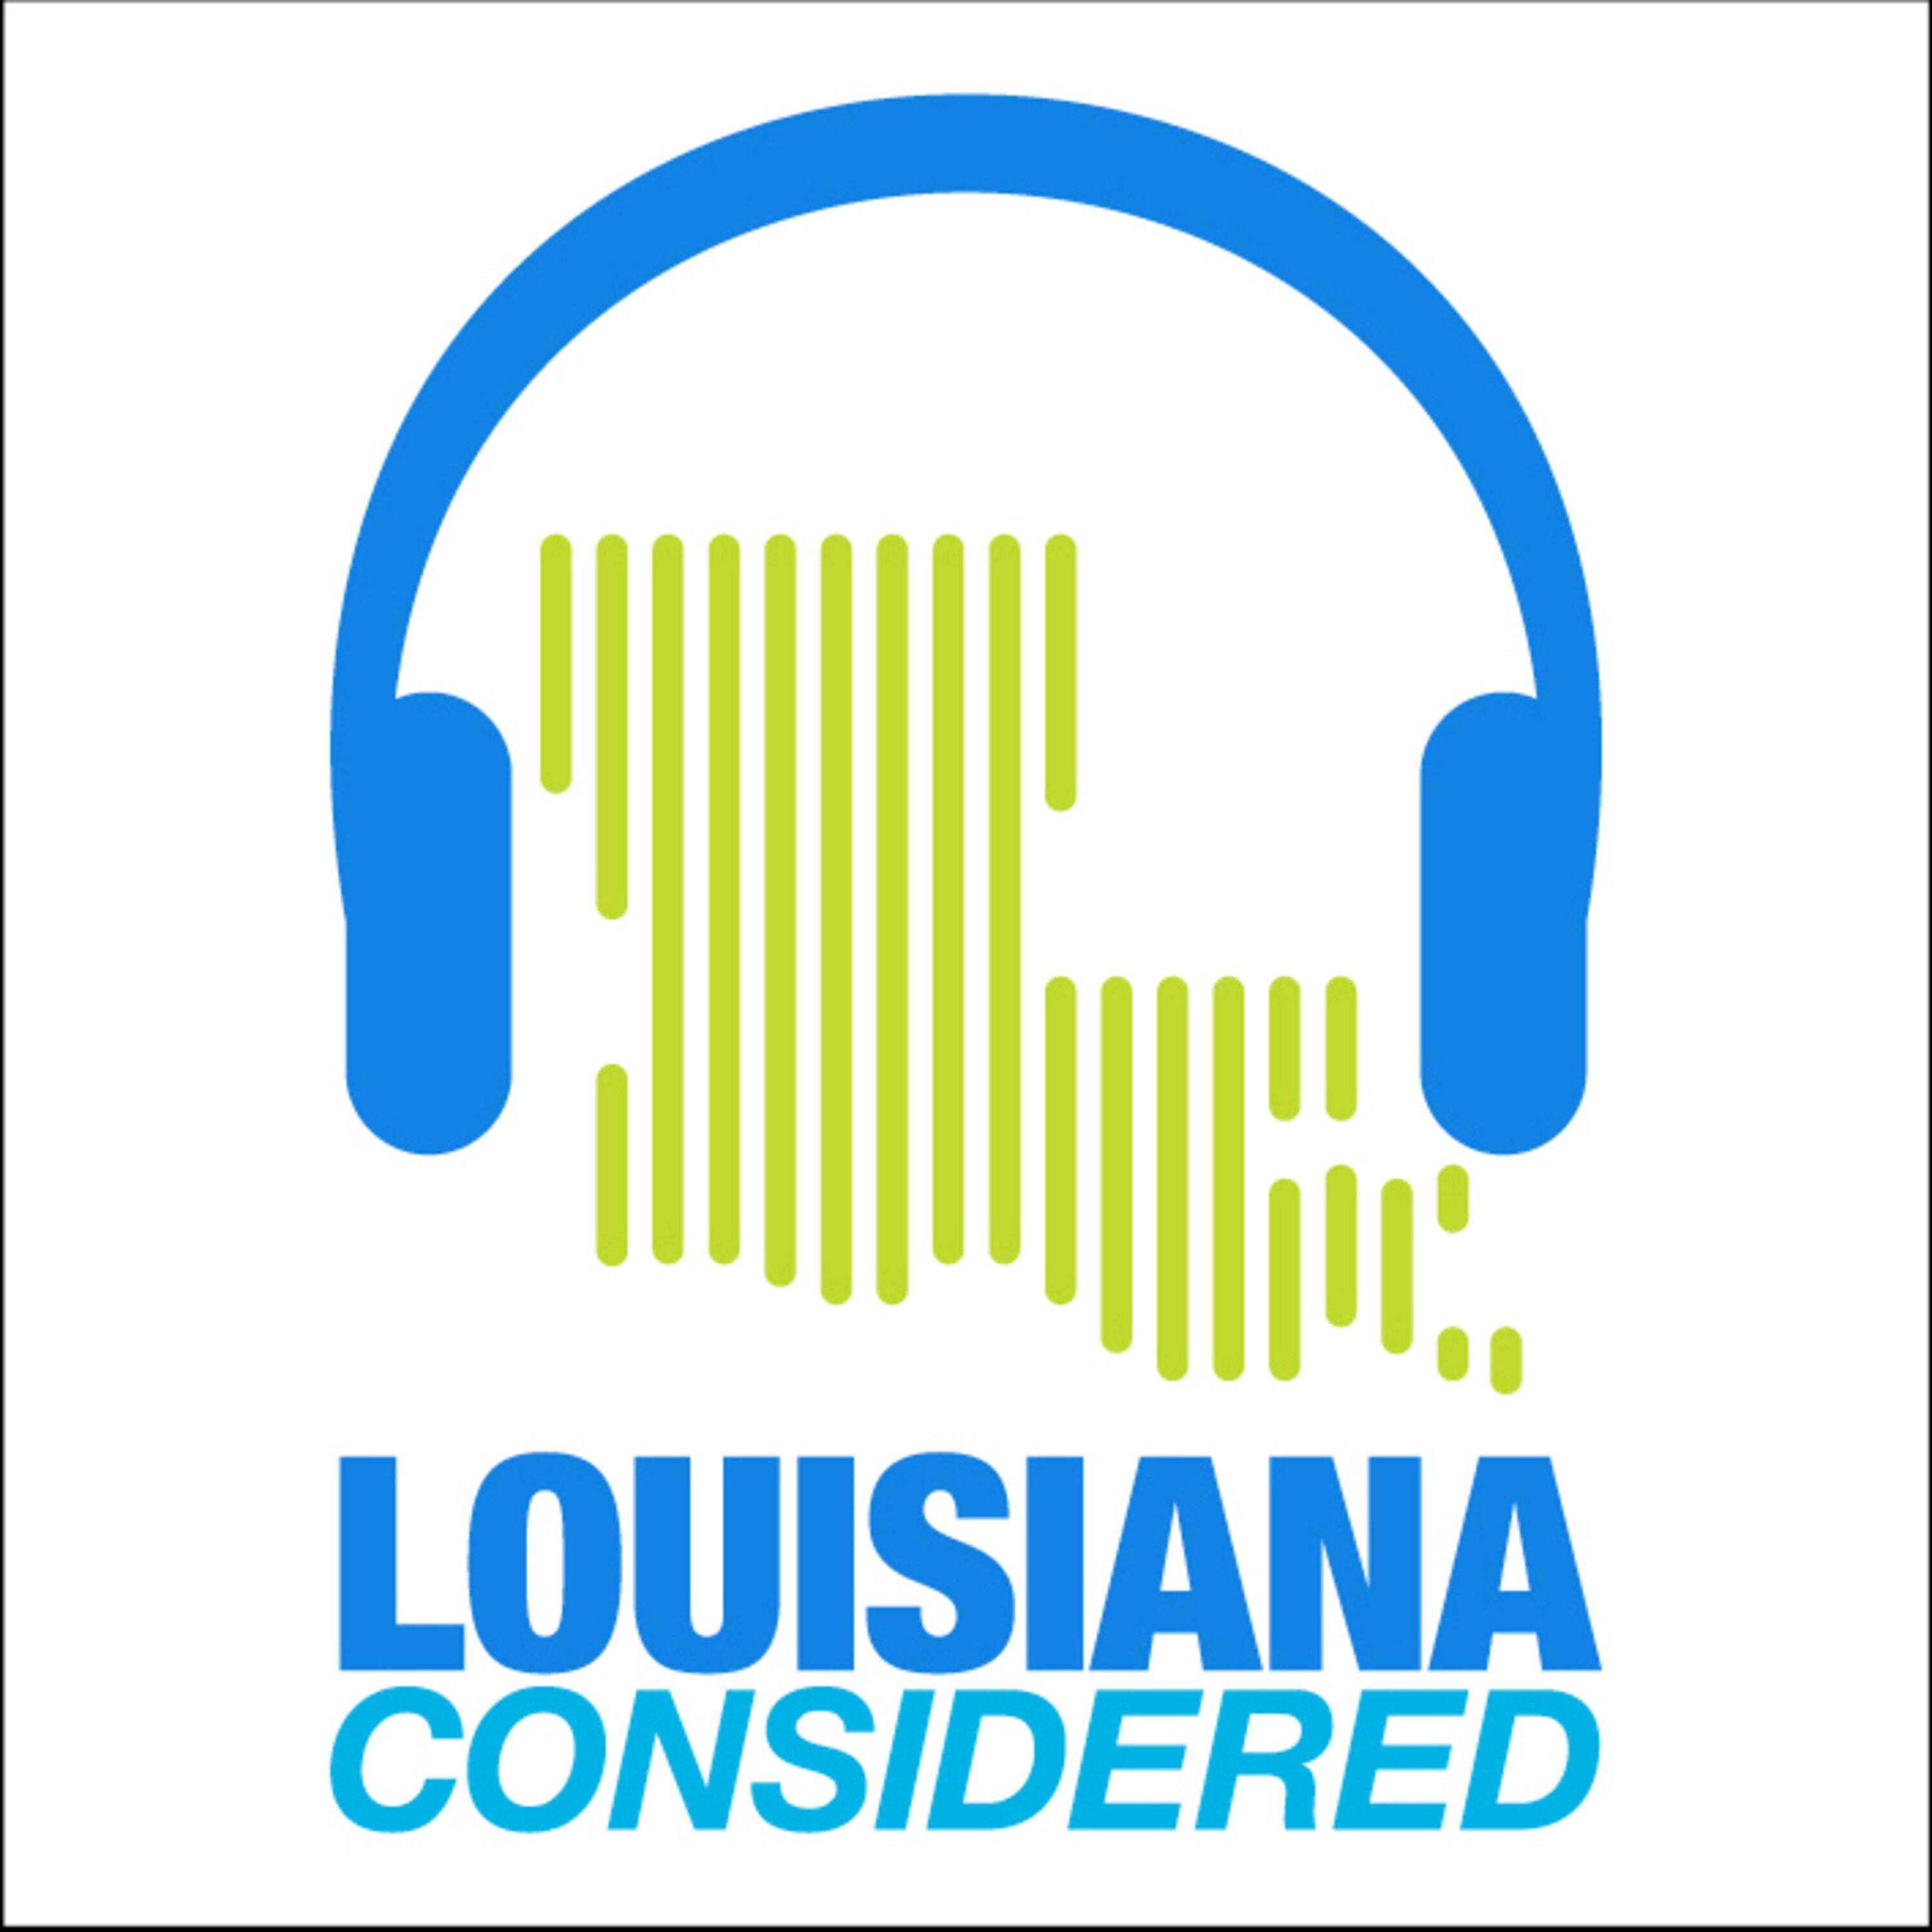 Thumbnail for "Louisiana Considered: December Supreme Court Hearing Could Lead To 15-Week Abortion Ban In Louisiana, Dr. Chelsea Gallo Will Lead Two New Orleans Orchestras, Rural Communities Struggle To Recover From Ida".